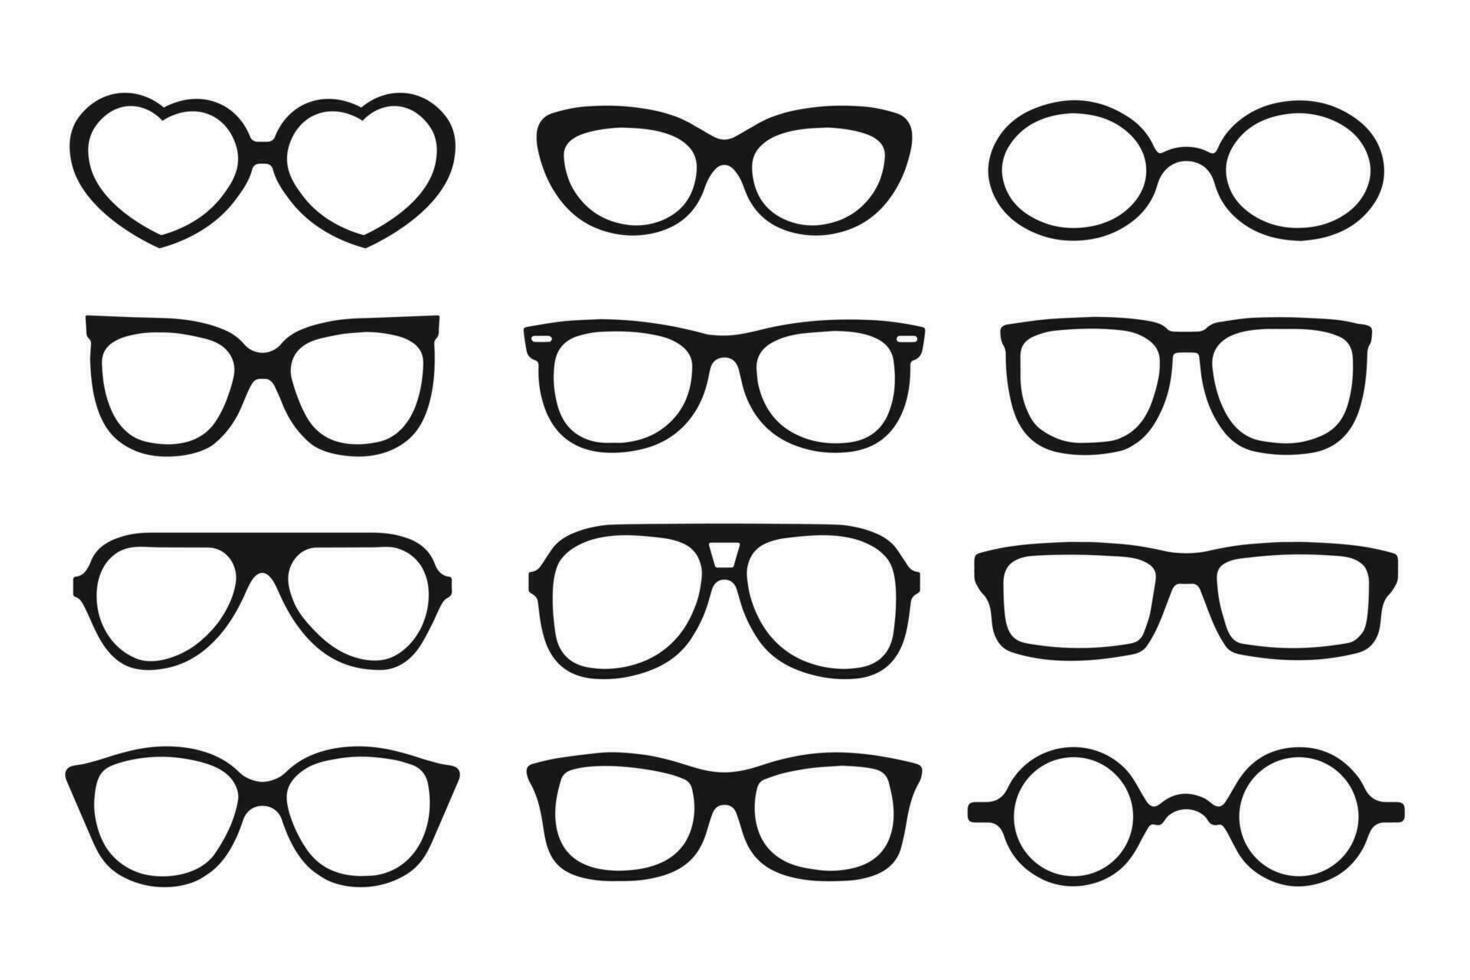 A set of sunglasses. Black silhouettes of frames for women's and men's glasses. Icons, vector